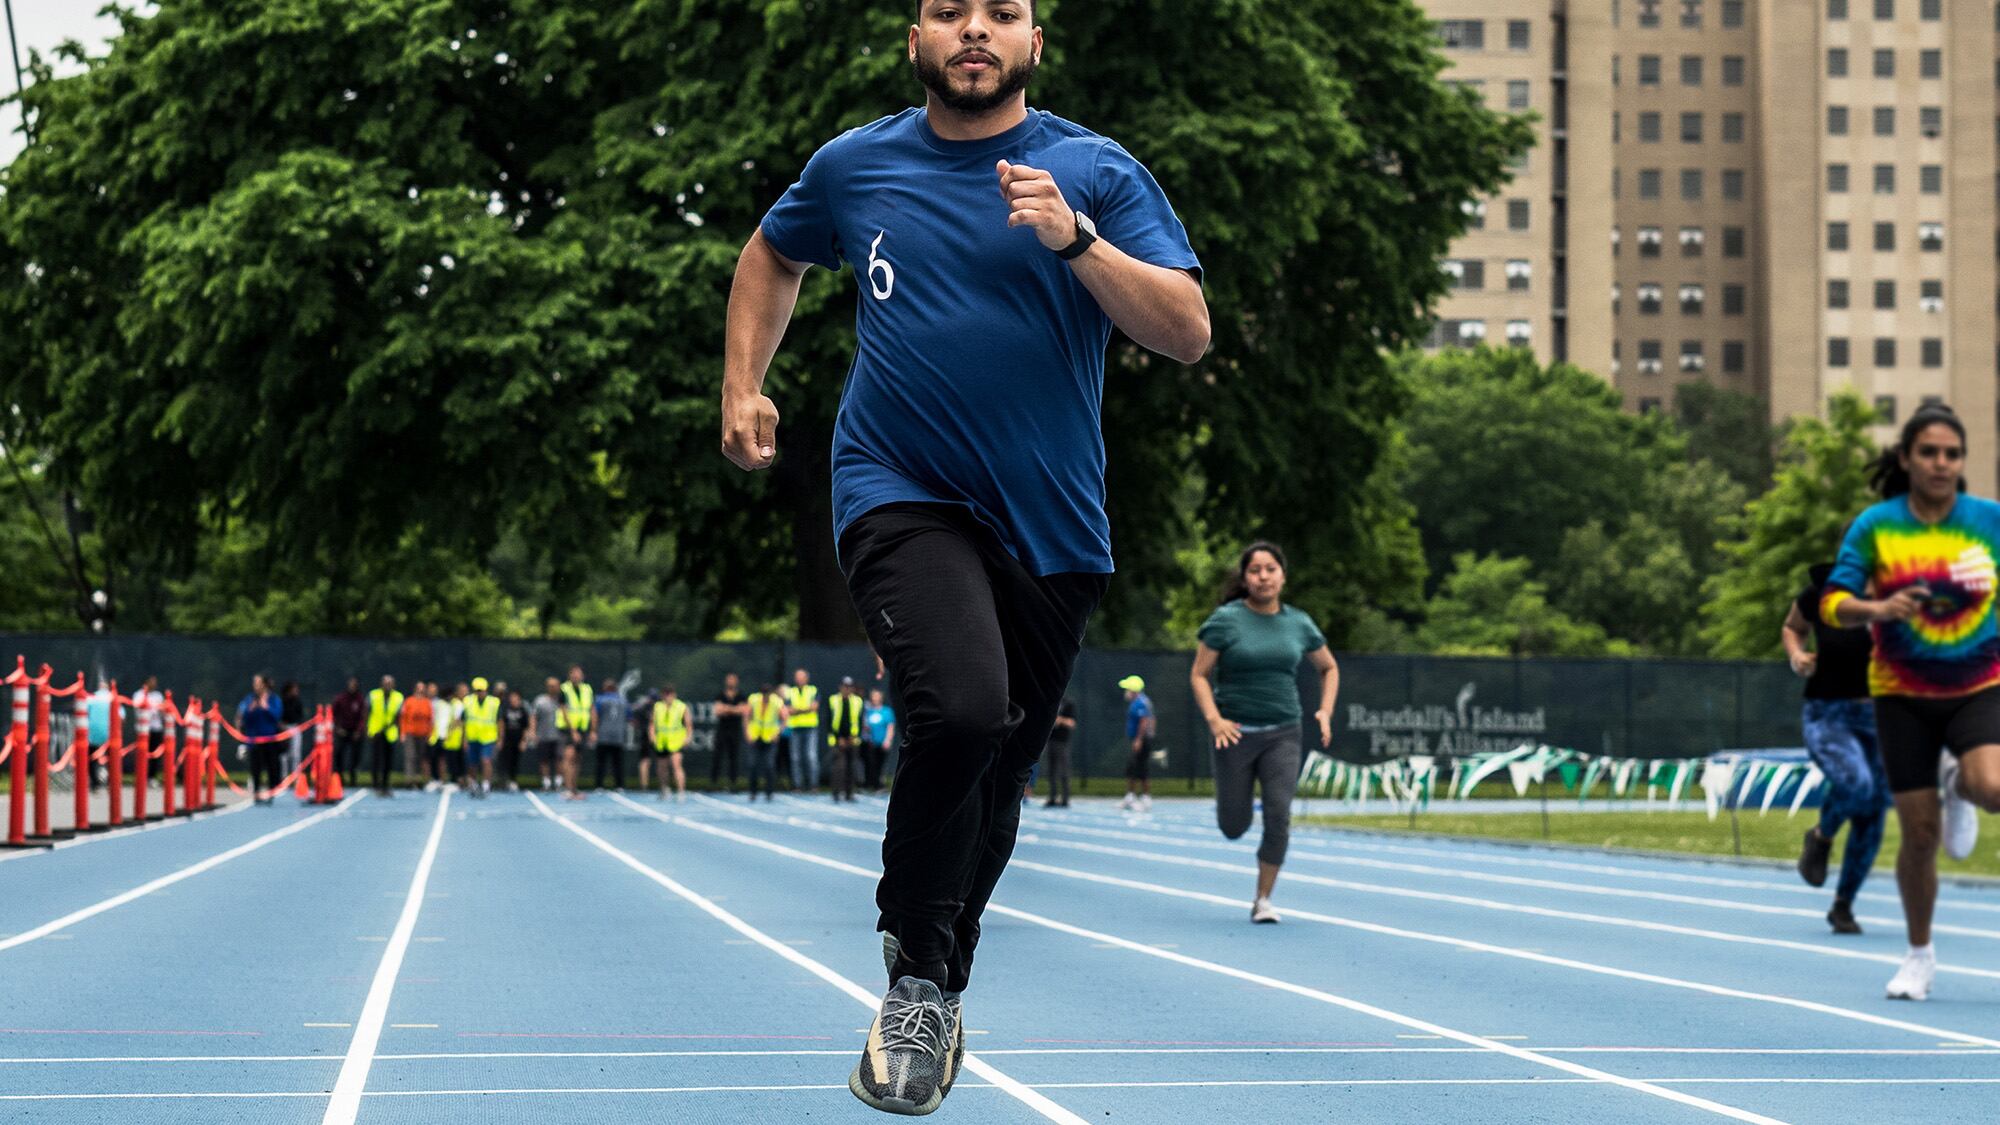 A man in a blue T-shirt and black pant running on a track.